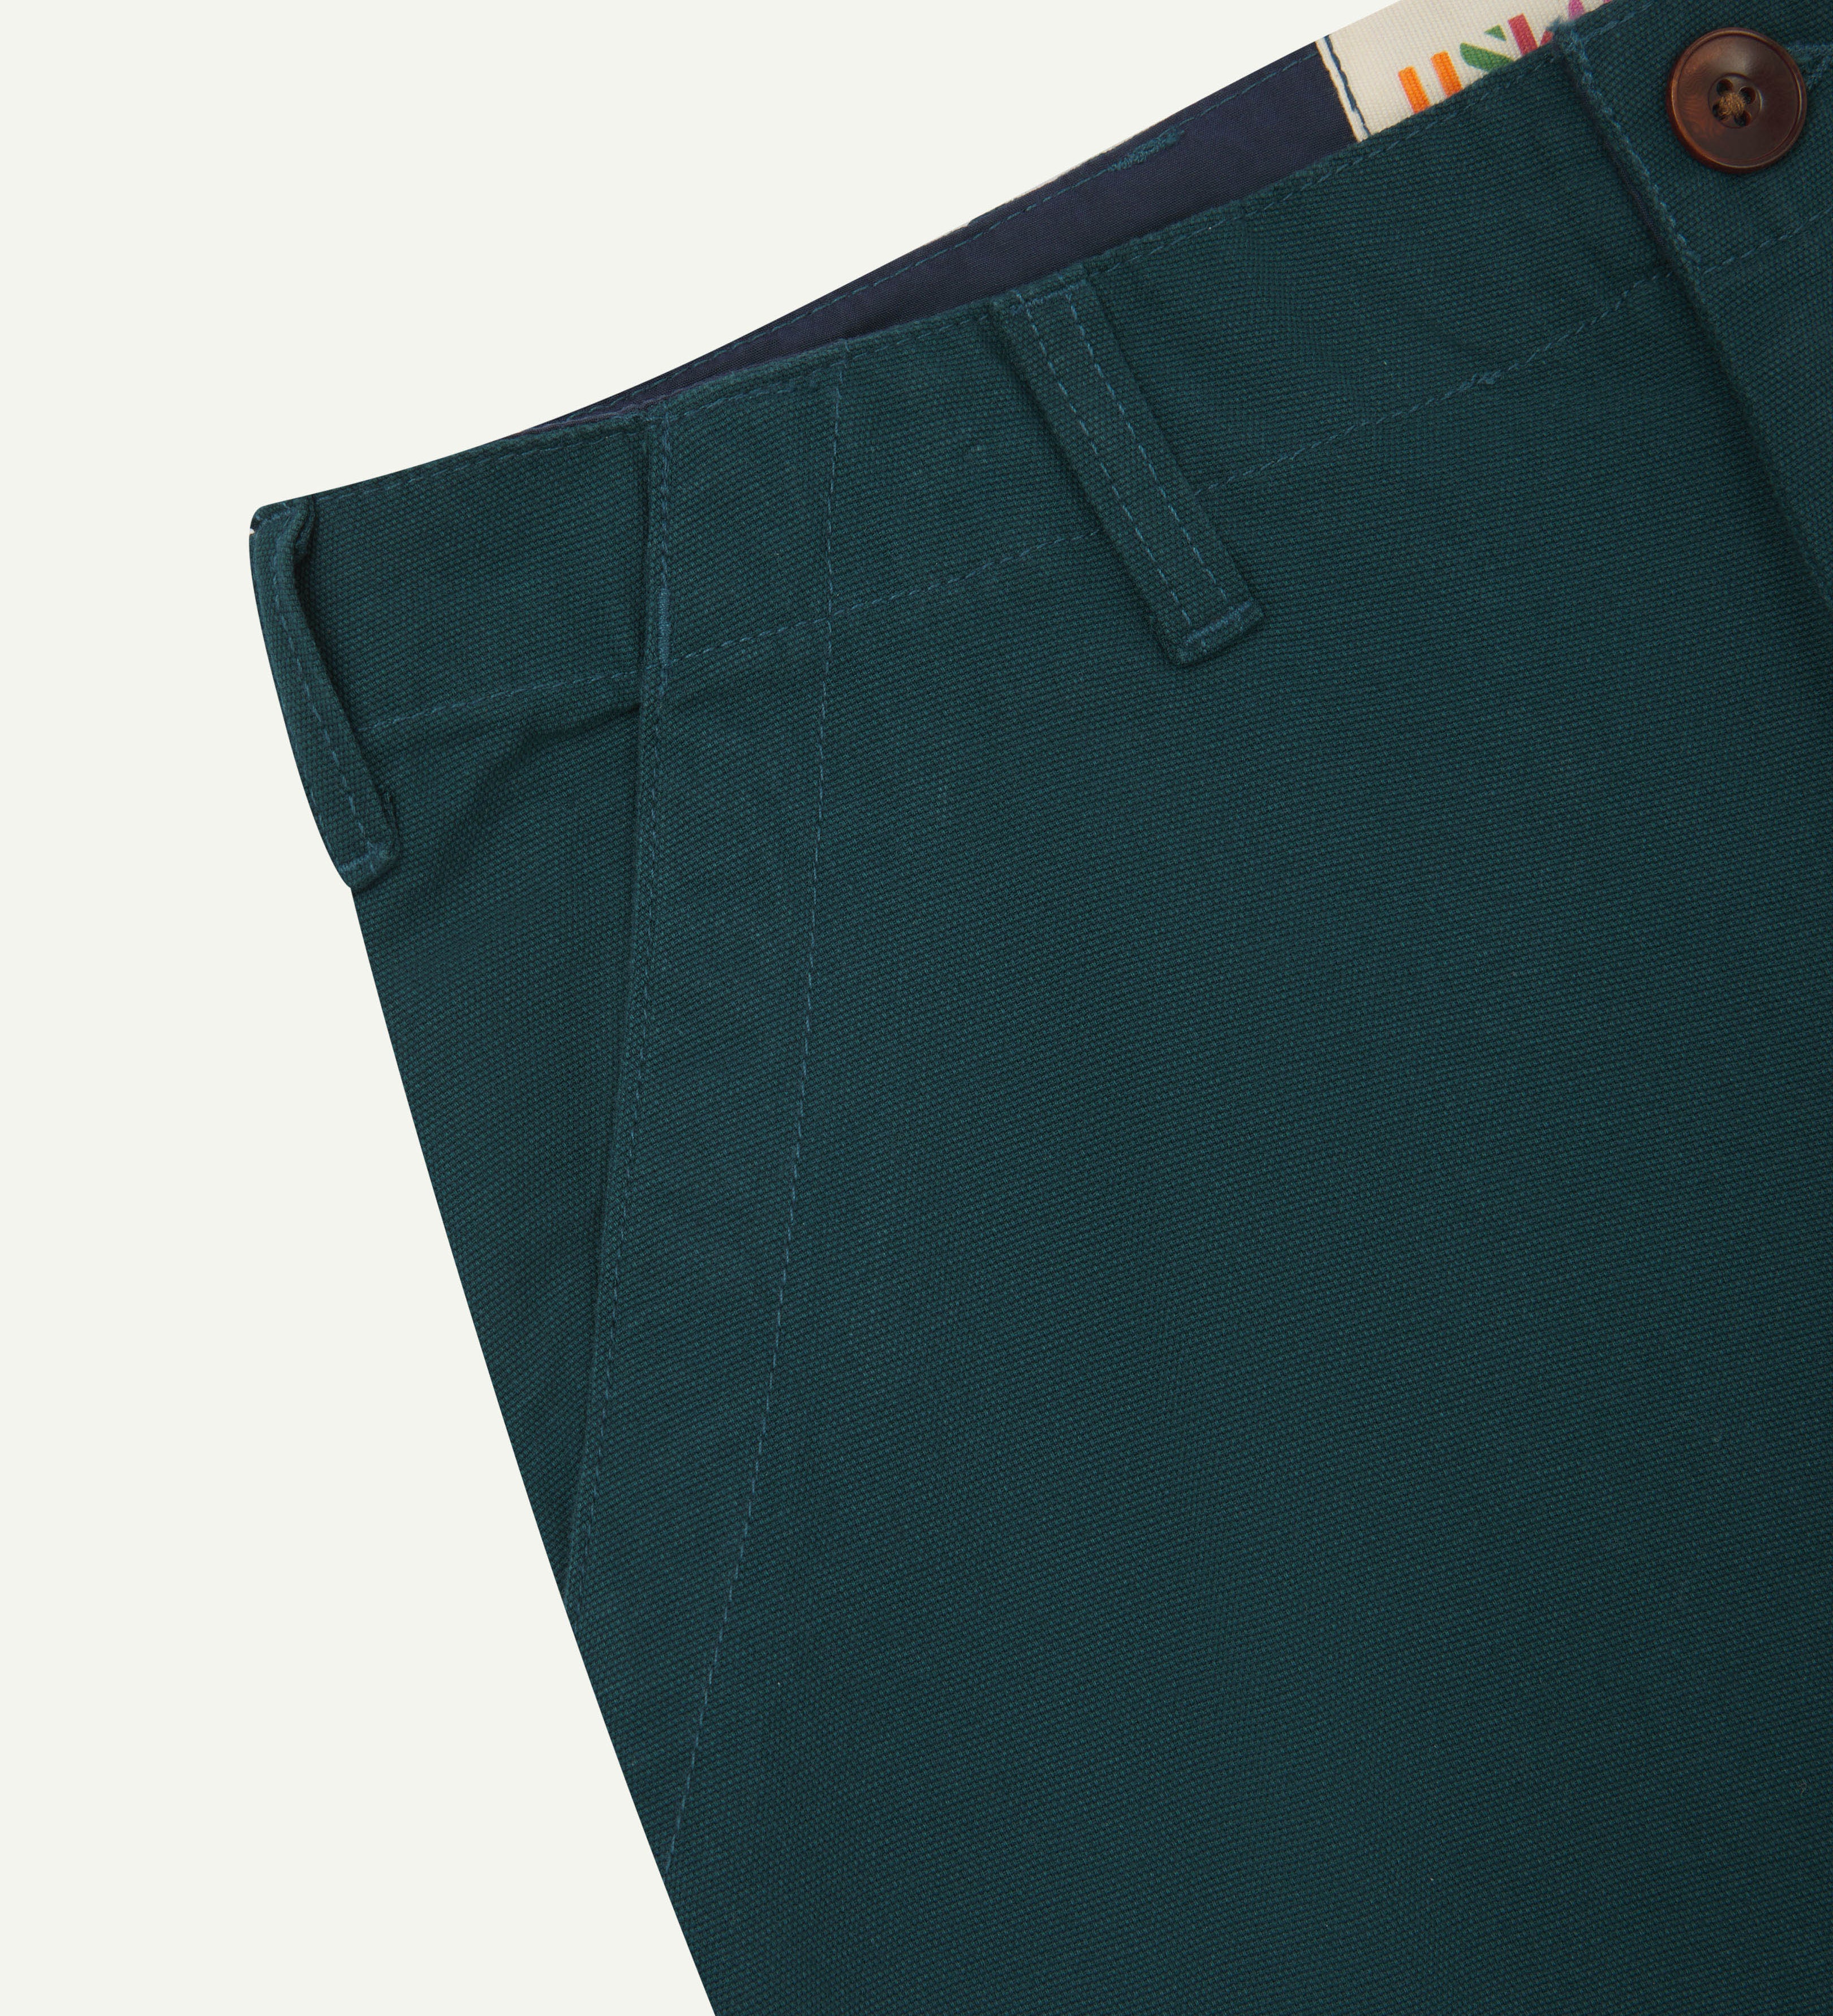 Focus on belt loops and fly area of the Uskees #5005 cargo pants in bright turquoise. View of side pockets and Uskees logo label on the inner back waist band.